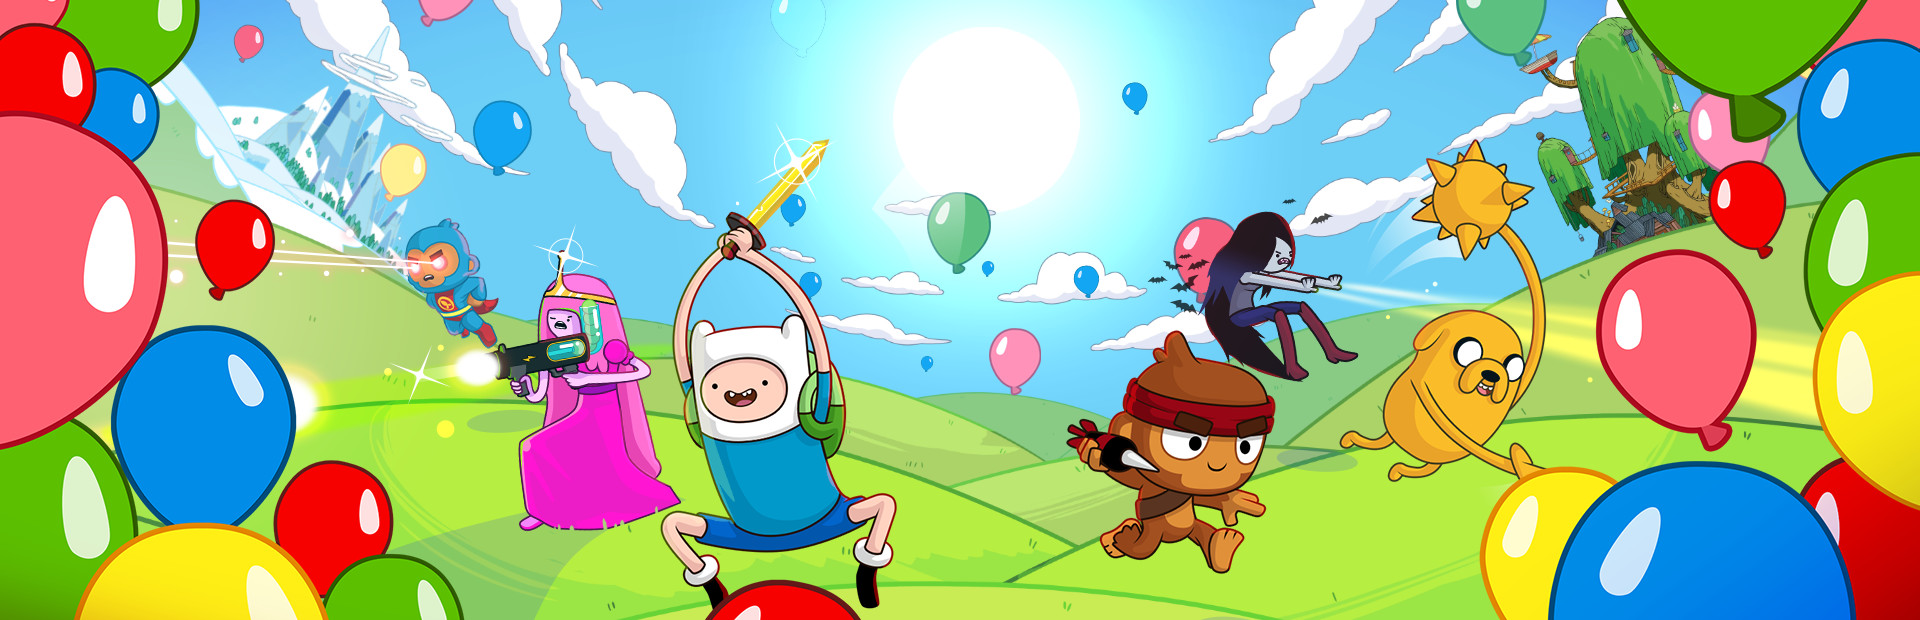 Bloons Adventure Time TD cover image